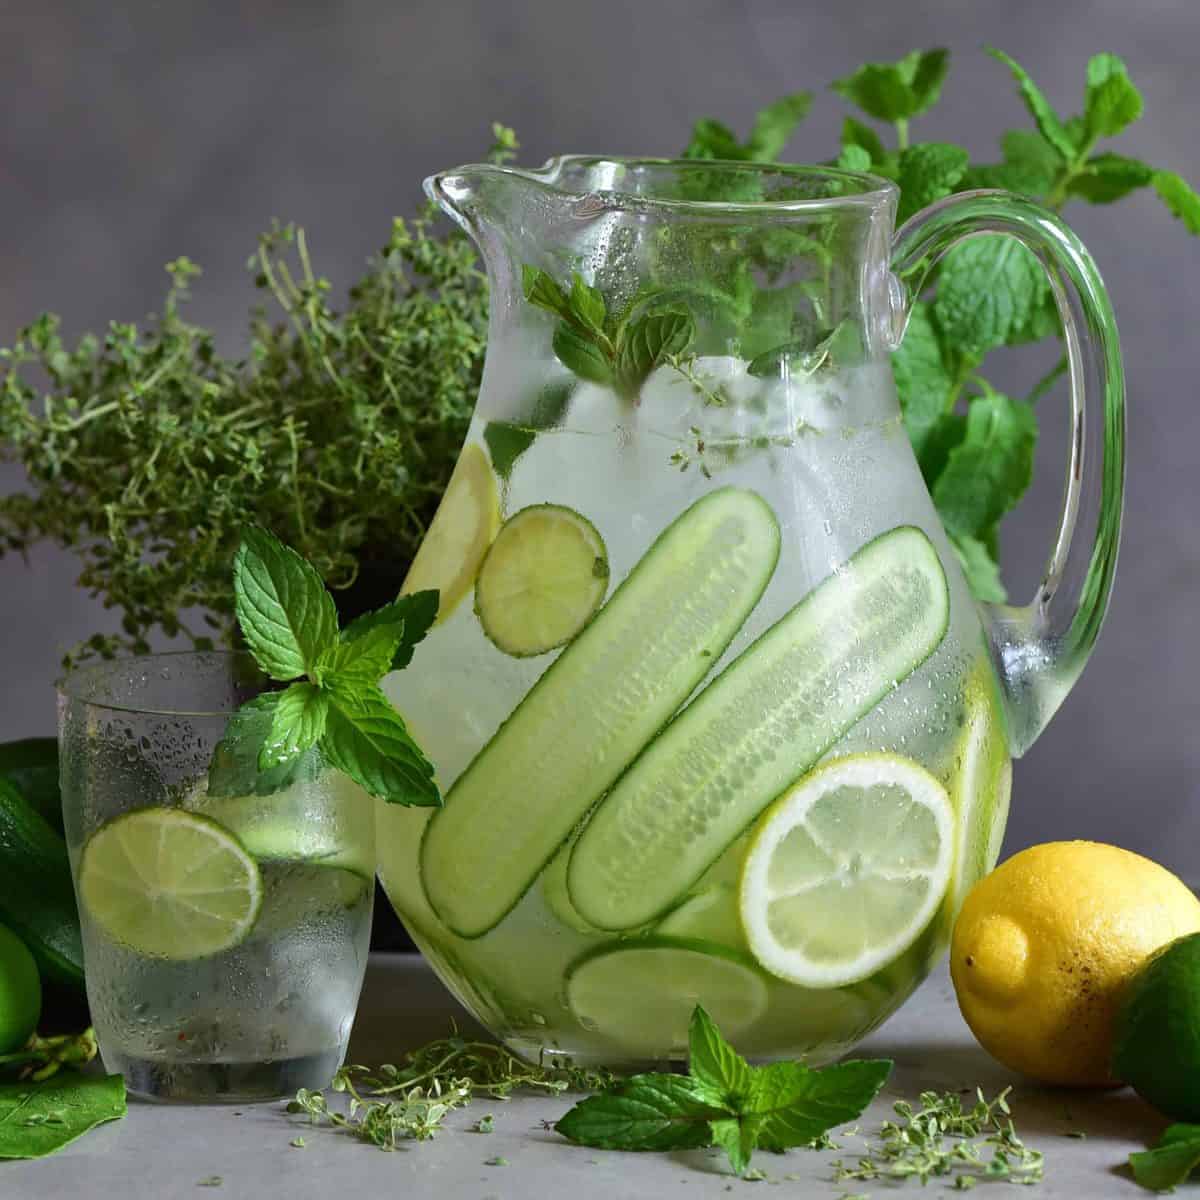 Flavored Water Recipes - All Natural and Quick - Alphafoodie